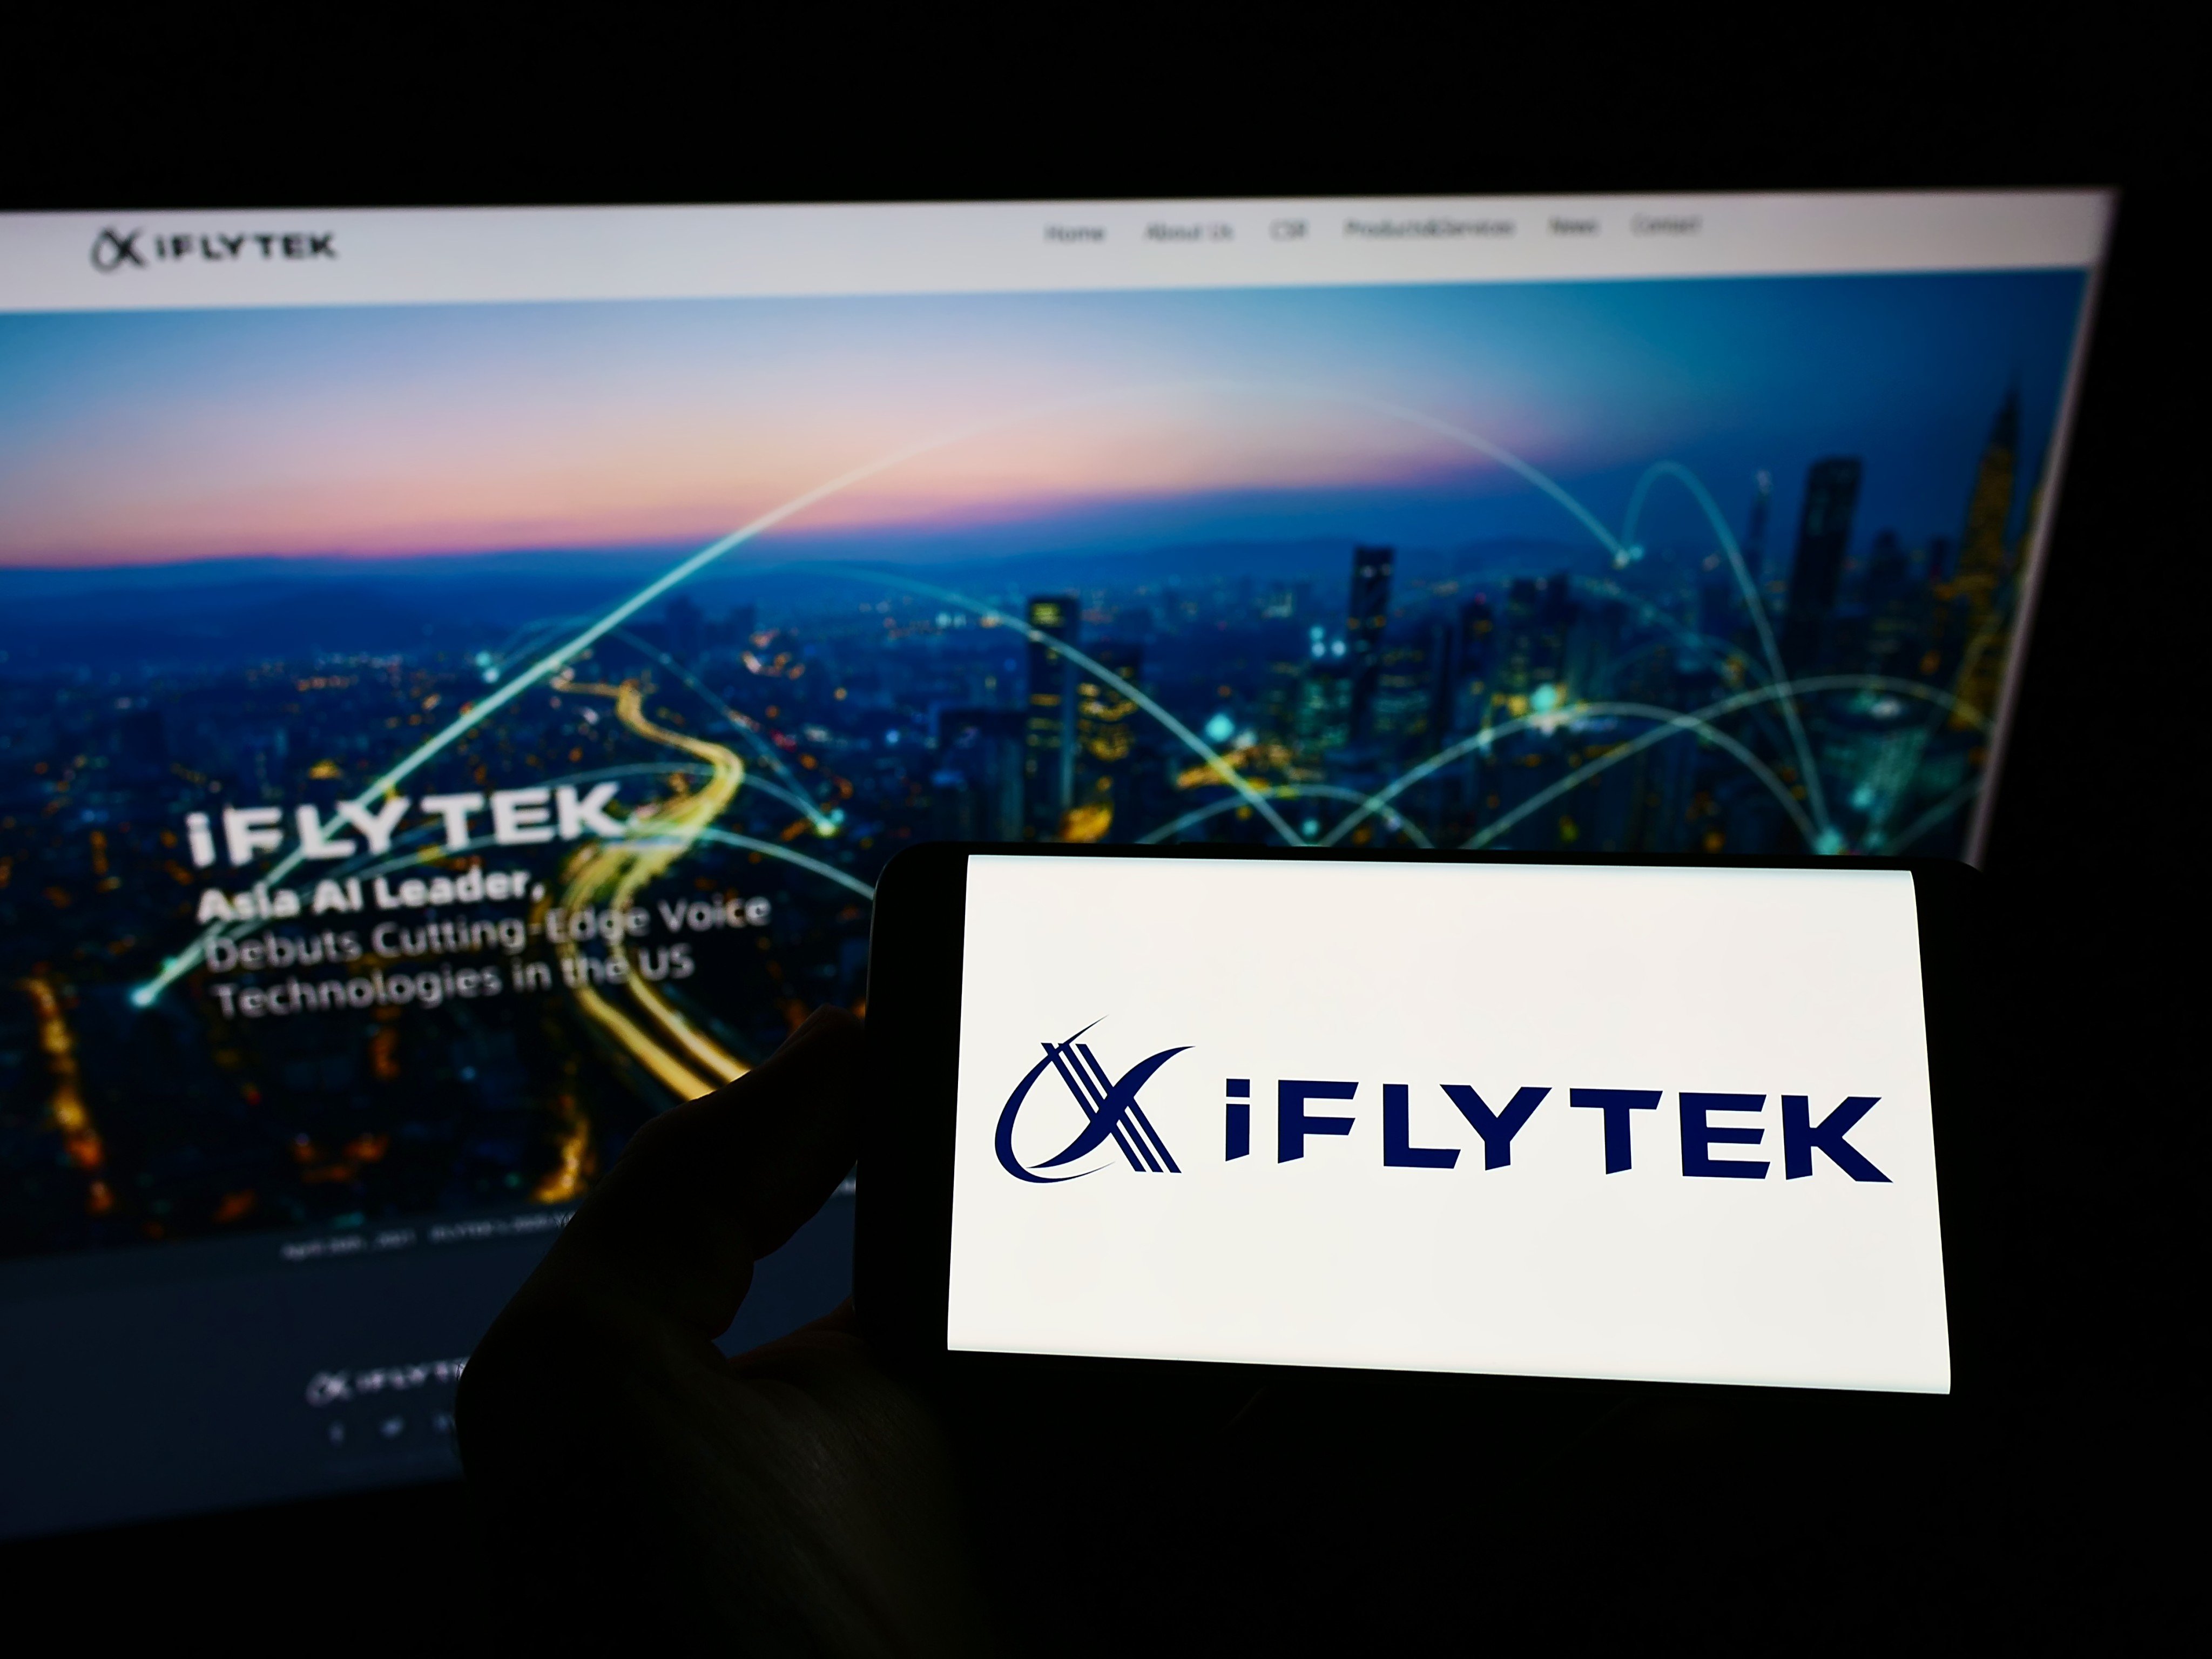 iFlyTek is one of China’s leading artificial intelligence firms specialising in speech recognition. Photo: Shutterstock